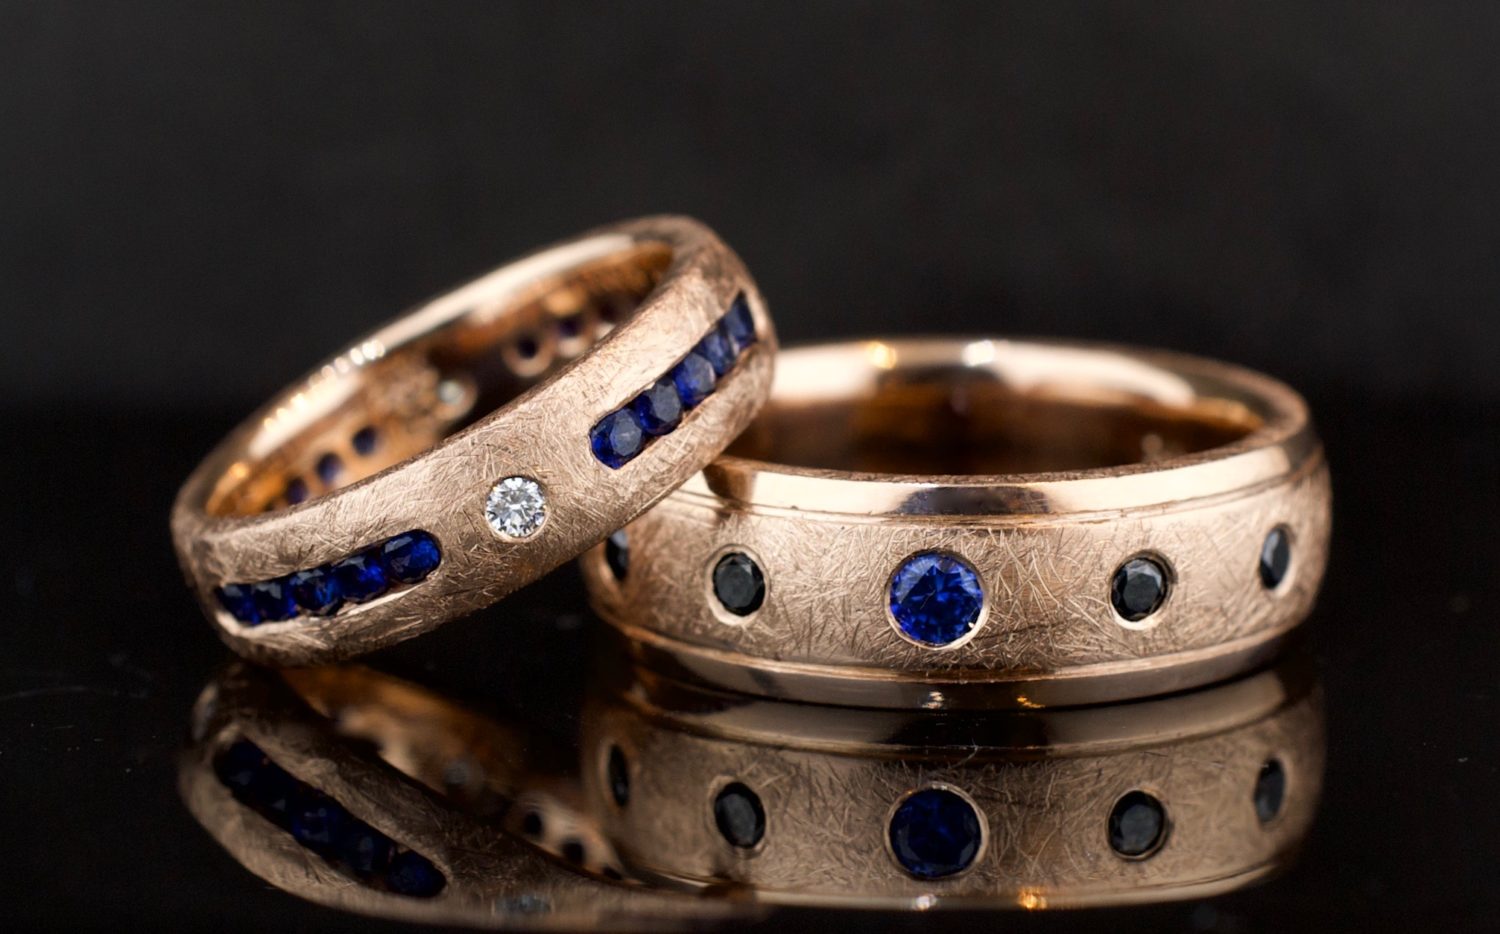 Matching Wedding Bands: Do you have to match?